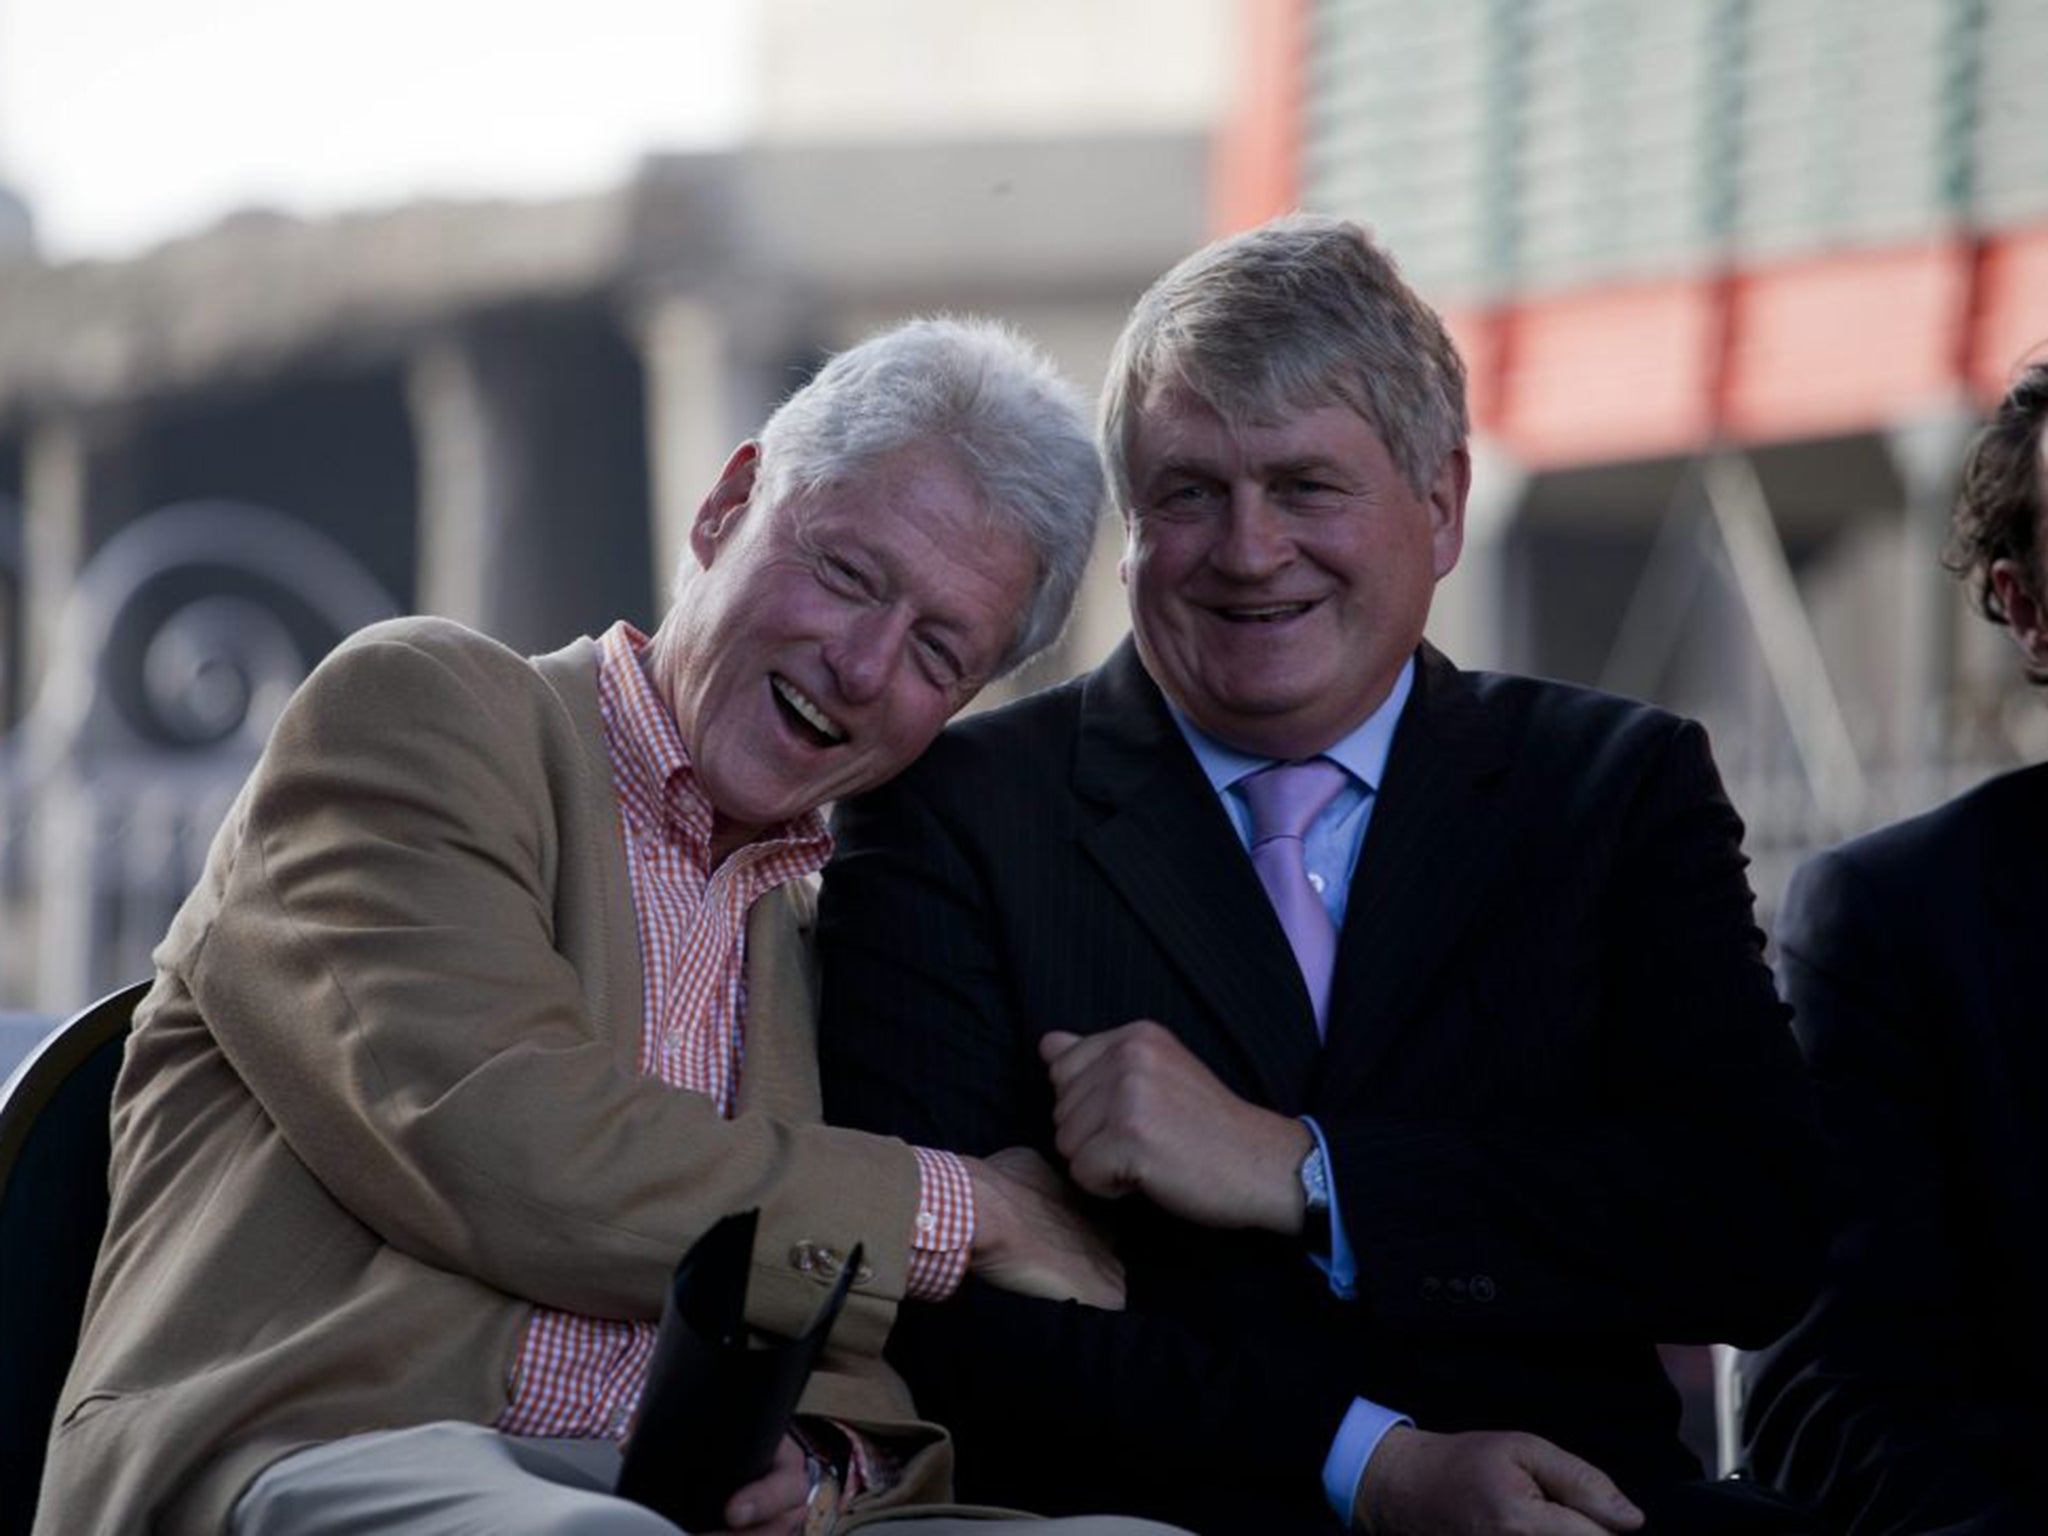 Denis O’Brien chats to former US President Bill Clinton in Haiti in 2011